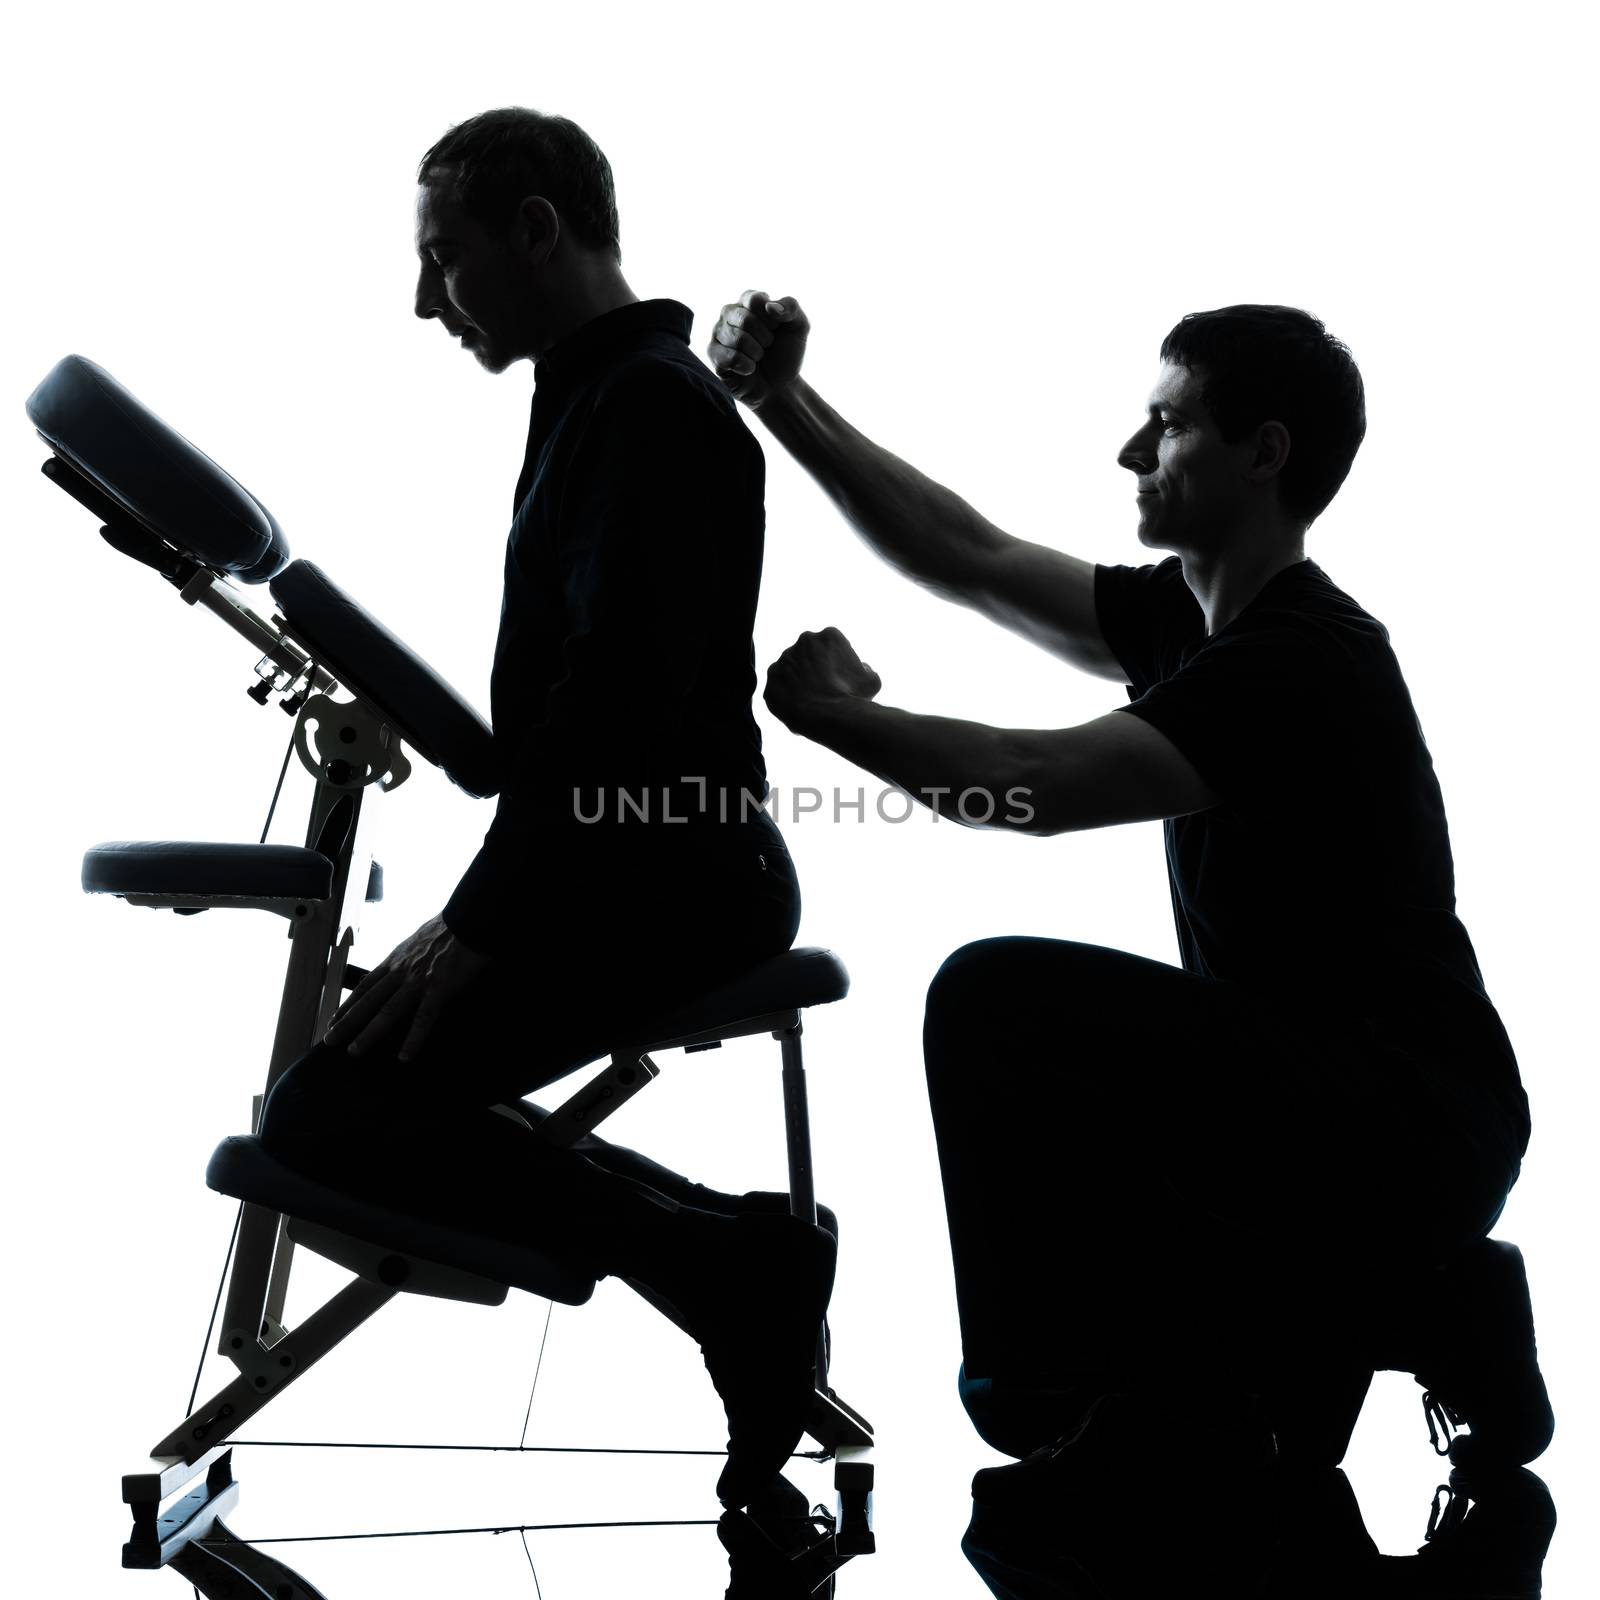 back massage therapy with chair silhouette by PIXSTILL